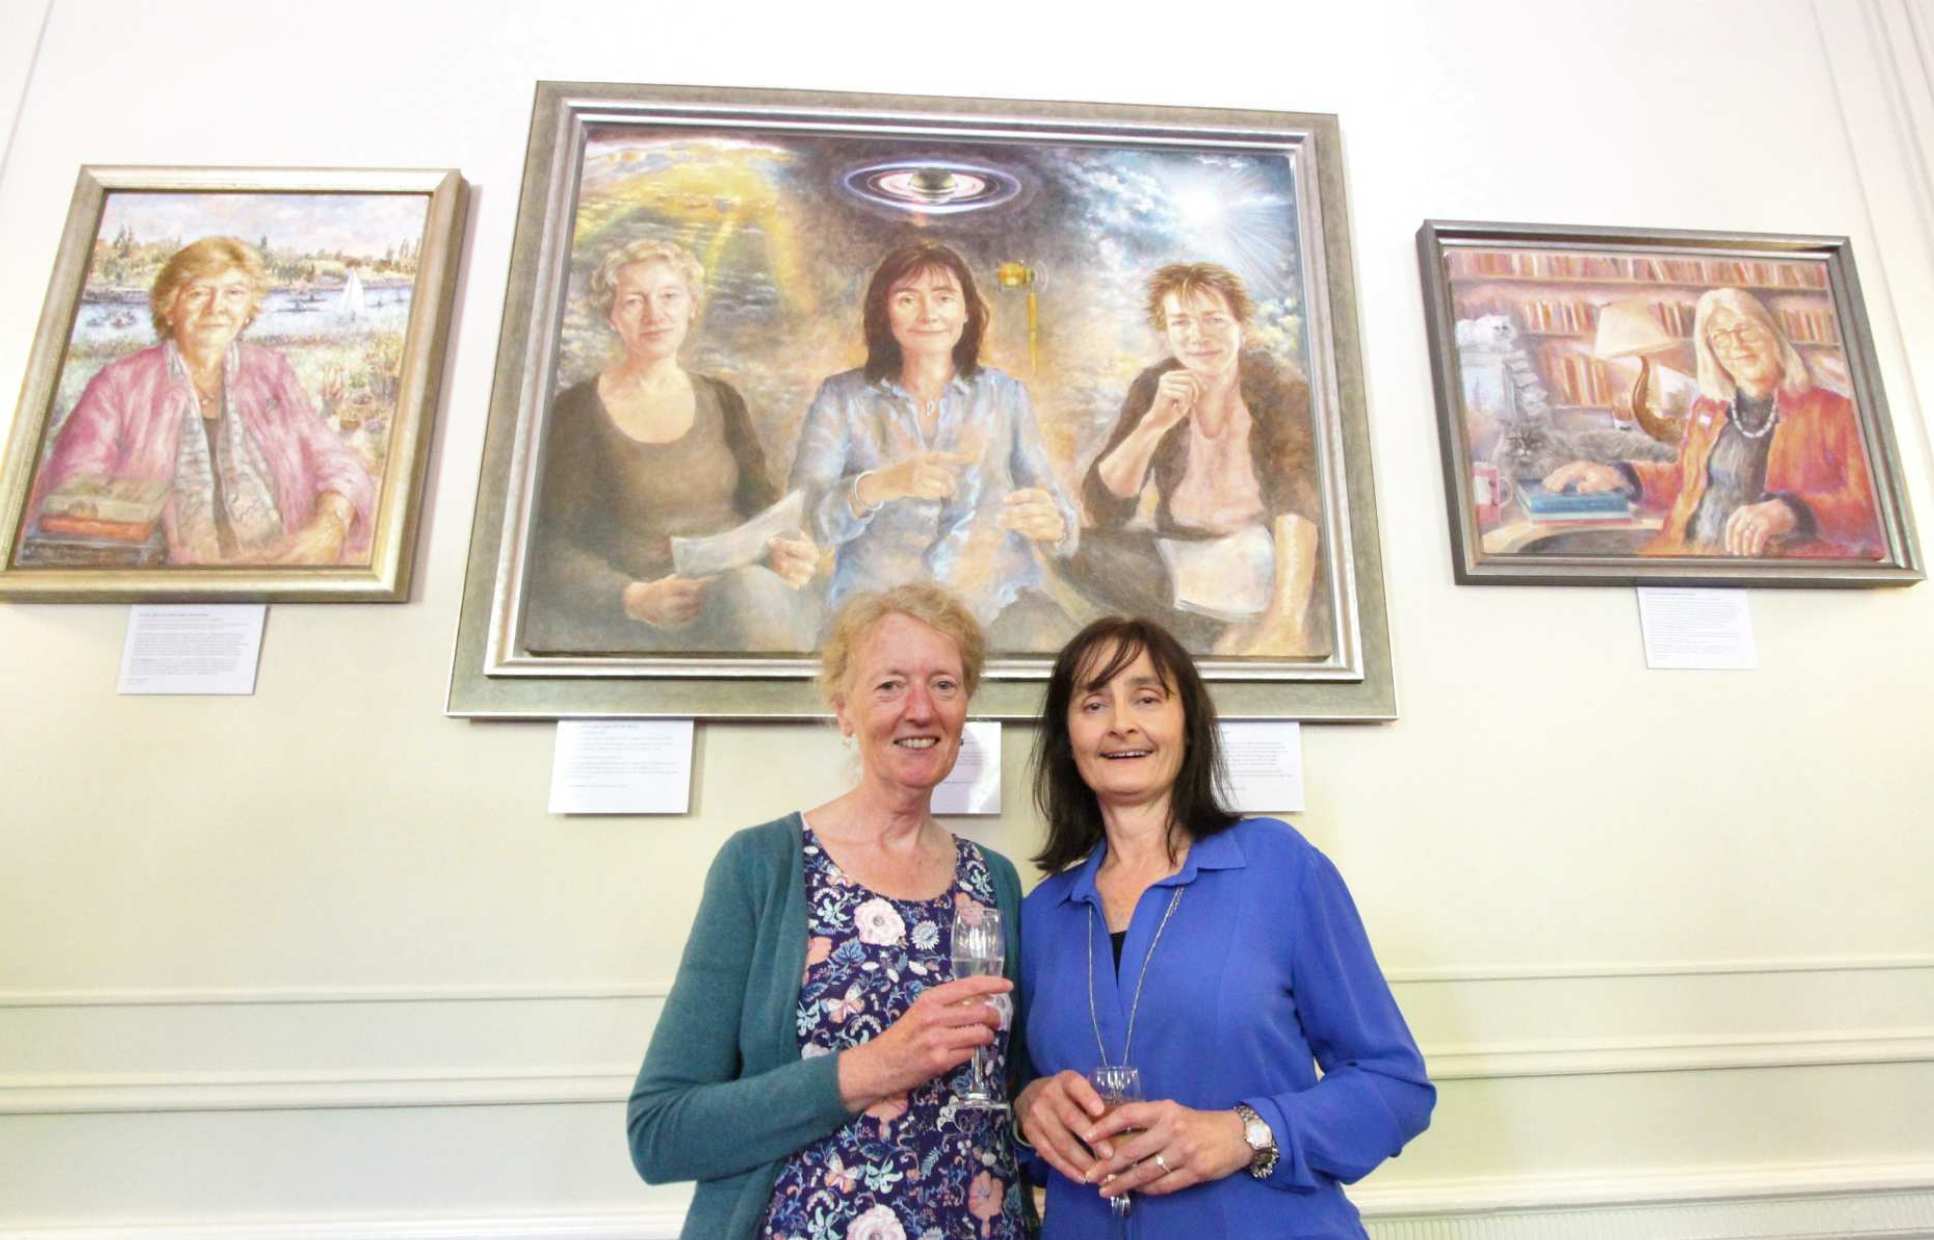 Professor Joanna Haigh (left) and Professor Michele Dougherty (right) in front of their new portrait